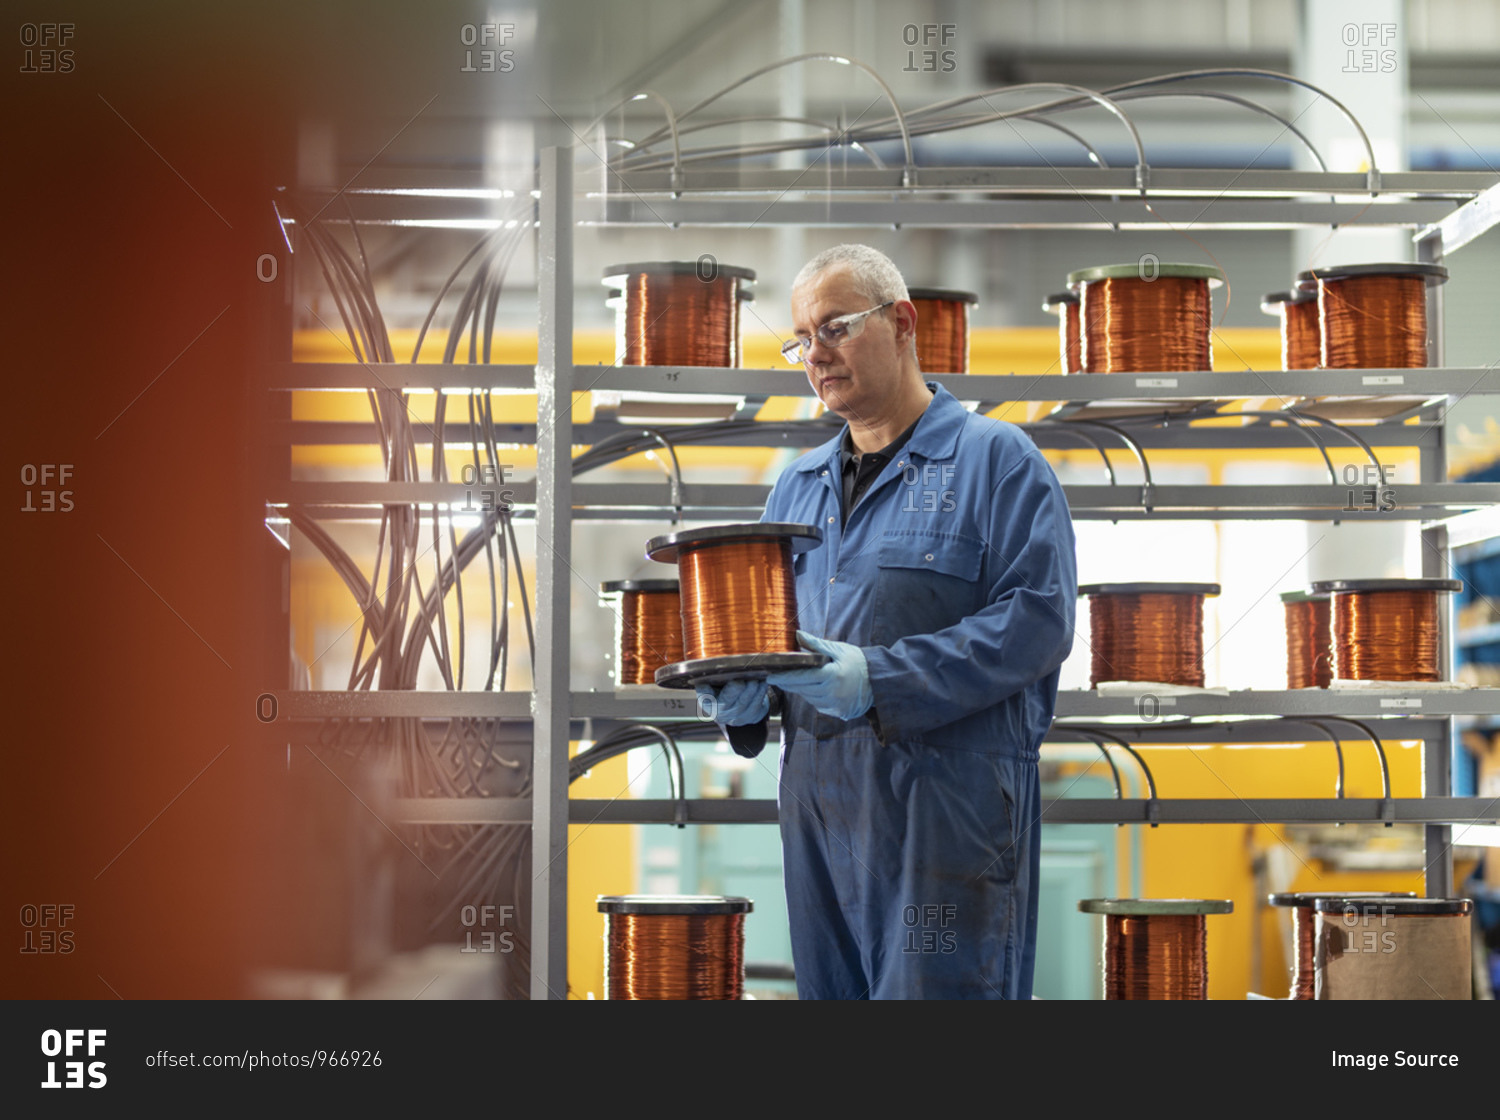 Electrical engineer with reel of copper wire in electrical
engineering factory stock photo - OFFSET